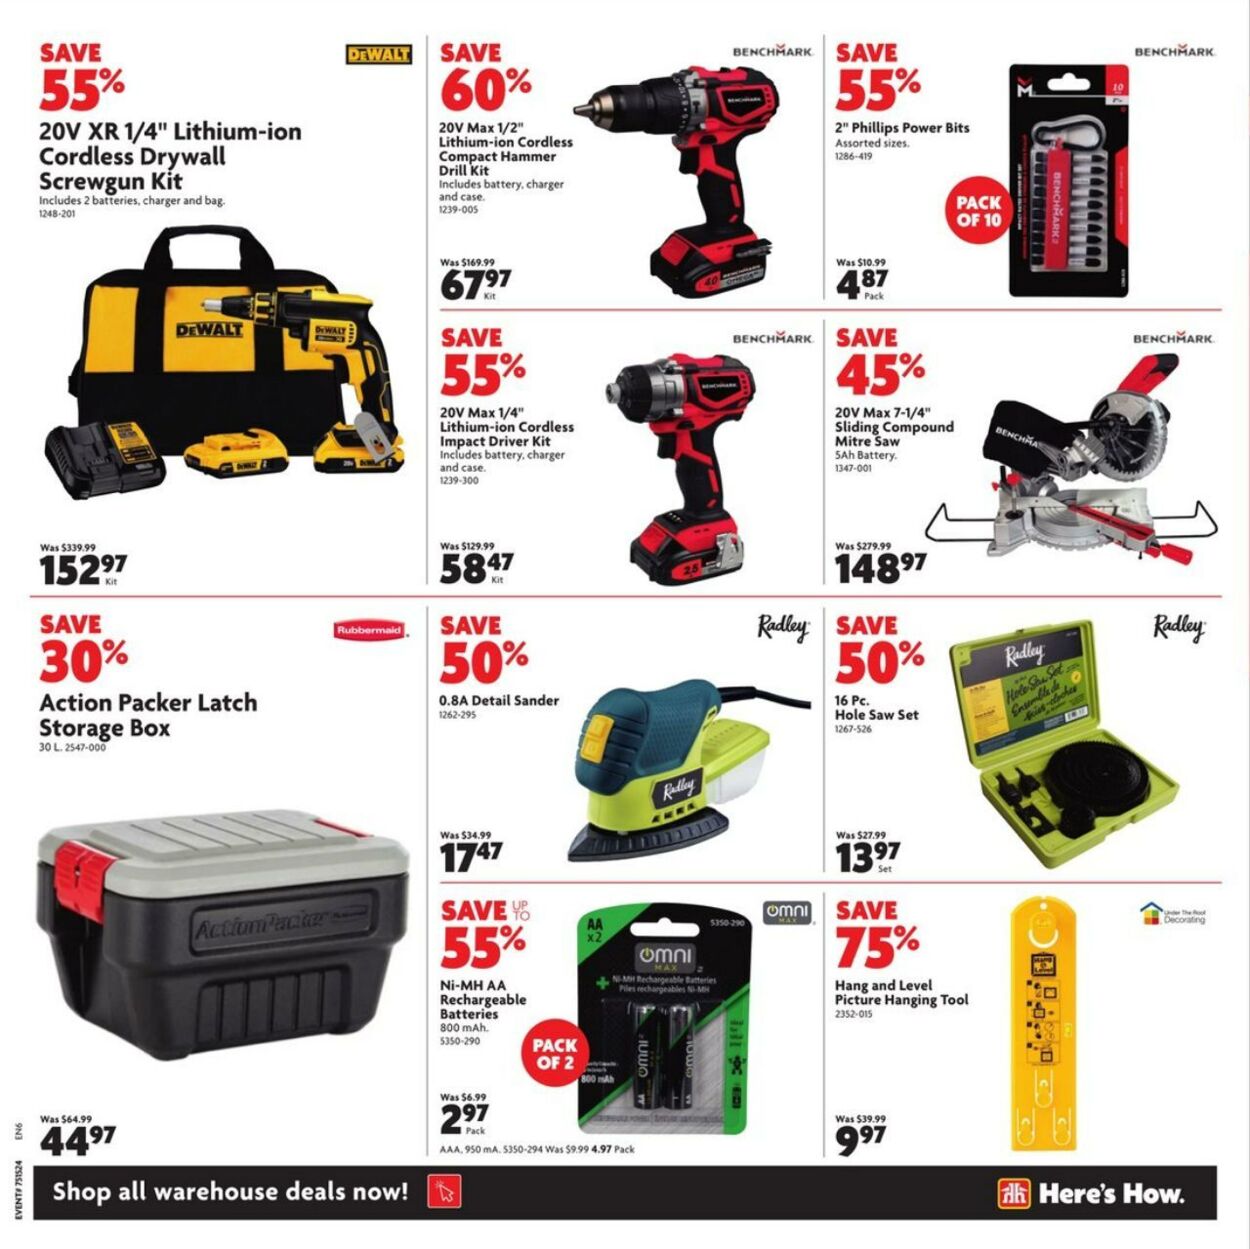 Home Hardware Flyer from 04/11/2024